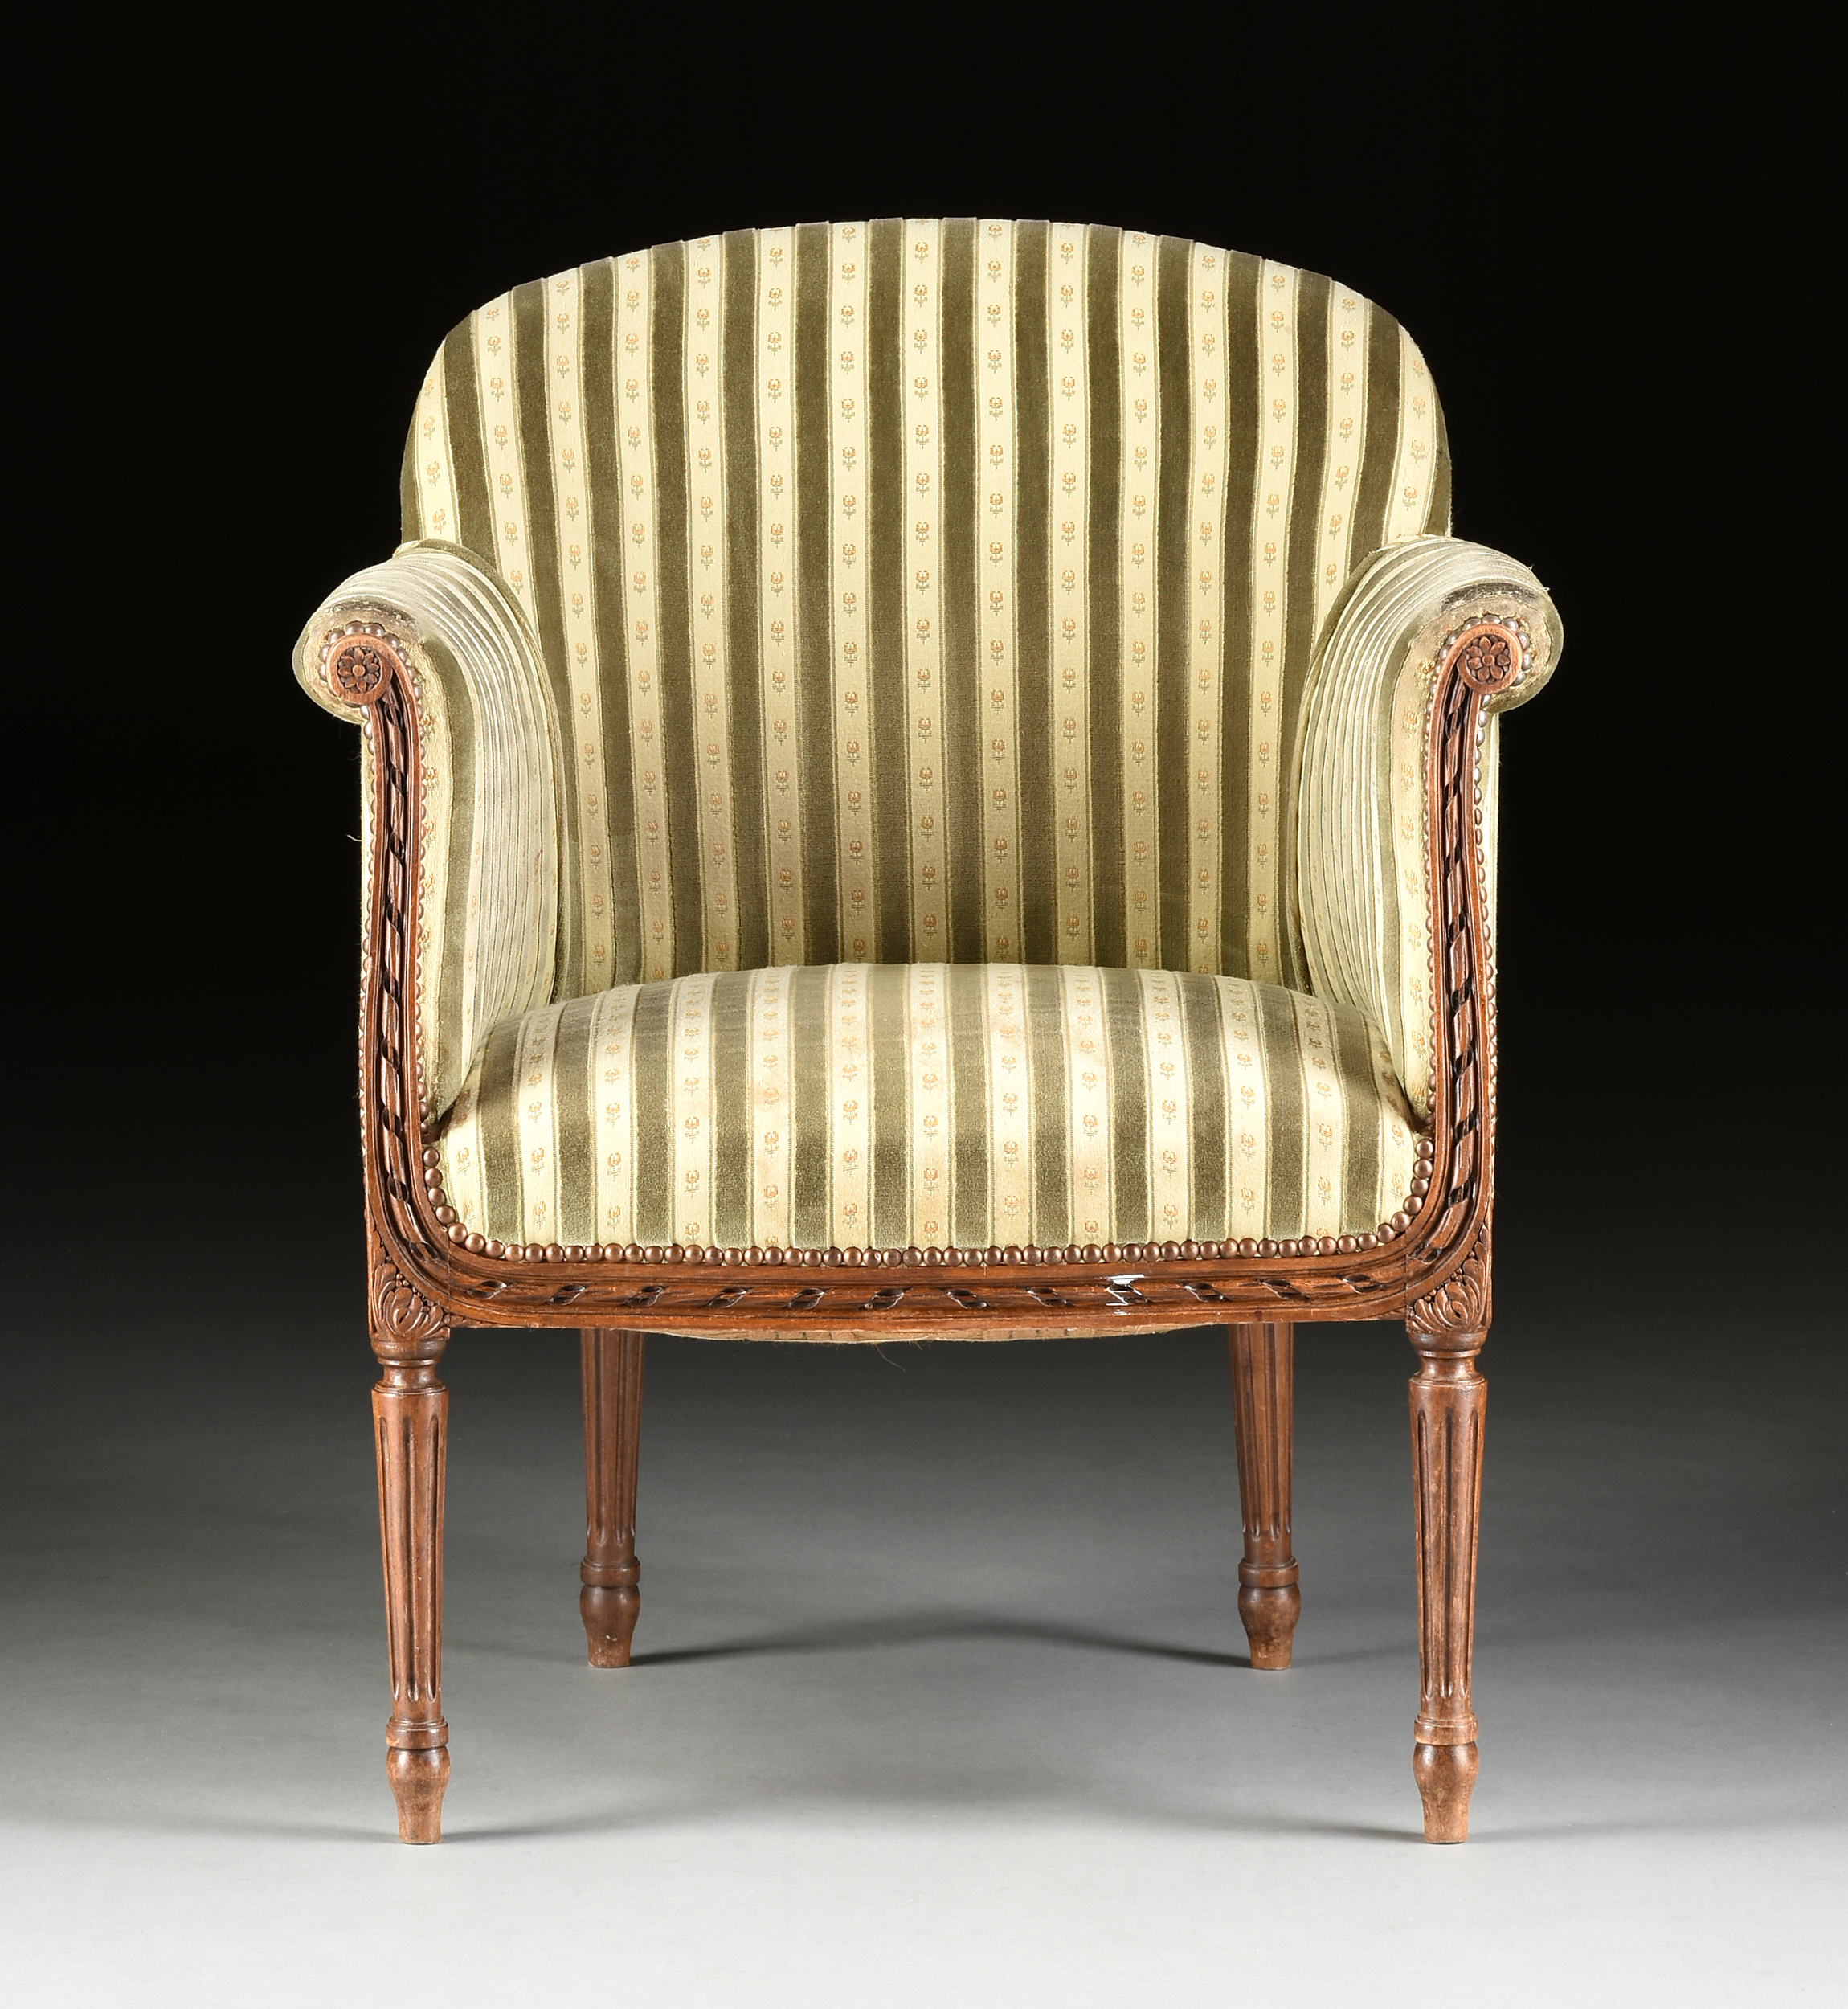 AN ELEGANT LOUIS XVI REVIVAL UPHOLSTERED AND CARVED WALNUT BERGÉRE EN GONDOLE, EARLY 20TH